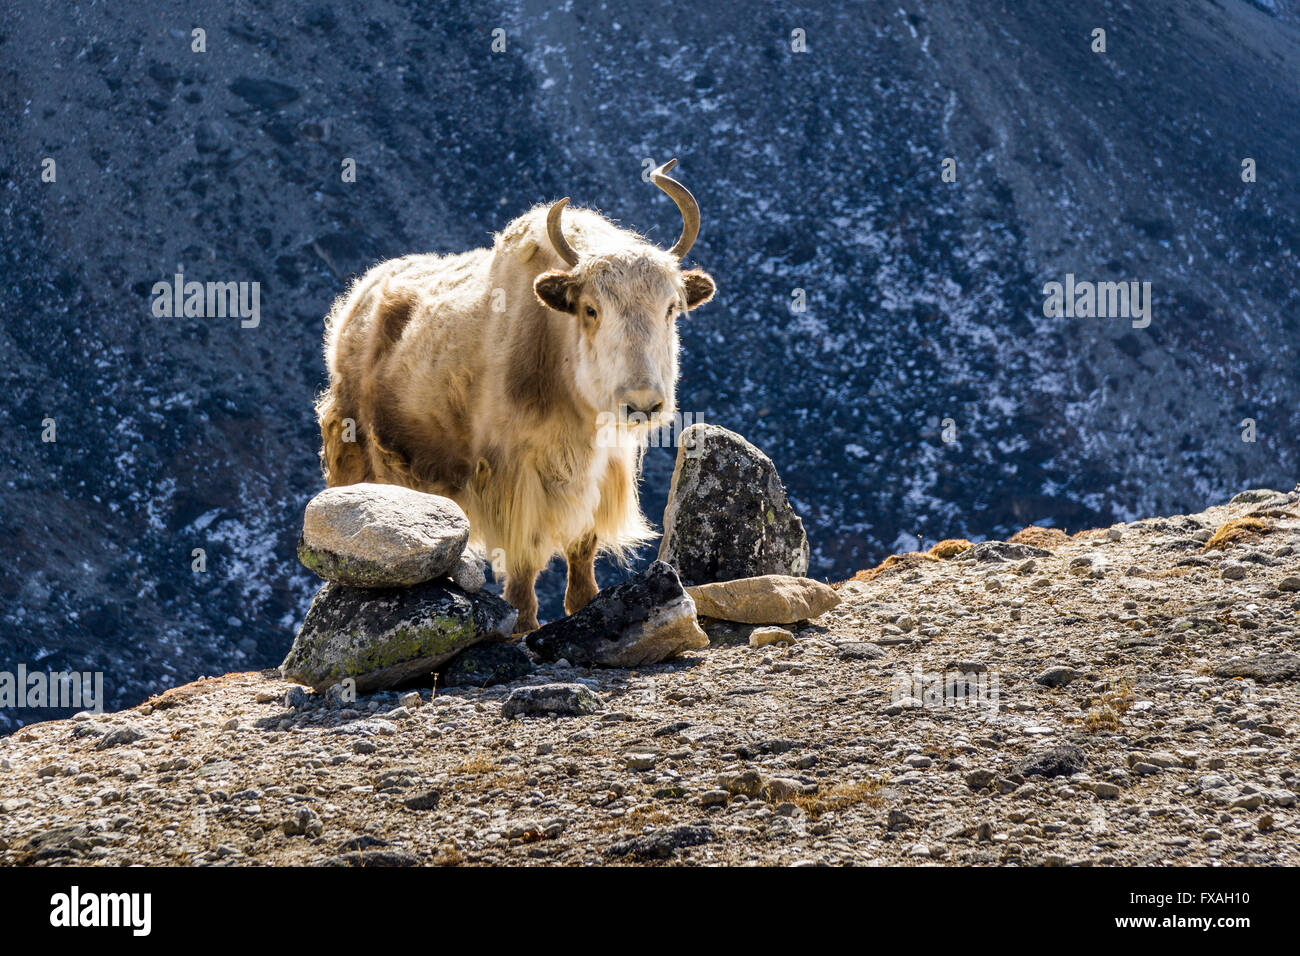 White yak (Bos mutus) standing on a hill, mountain slopes in the distance, Dzongla, Solo Khumbu, Nepal Stock Photo